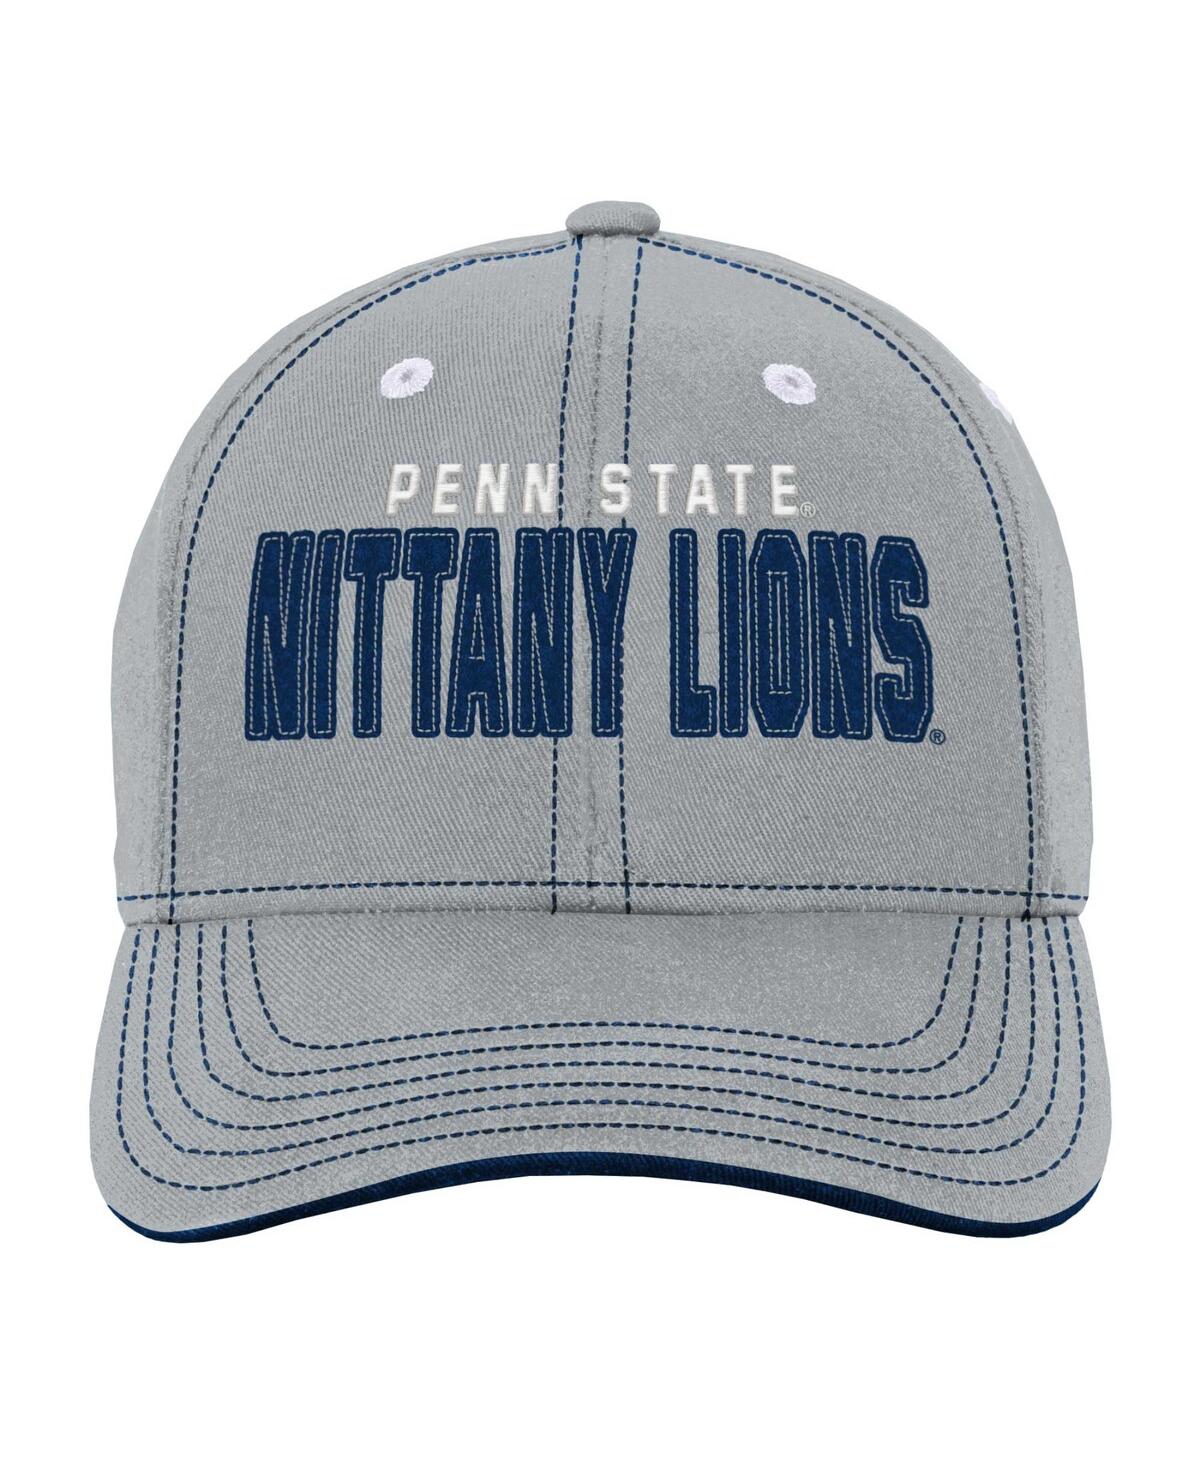 Shop Outerstuff Youth Boys And Girls Gray Penn State Nittany Lions Old School Slouch Adjustable Hat